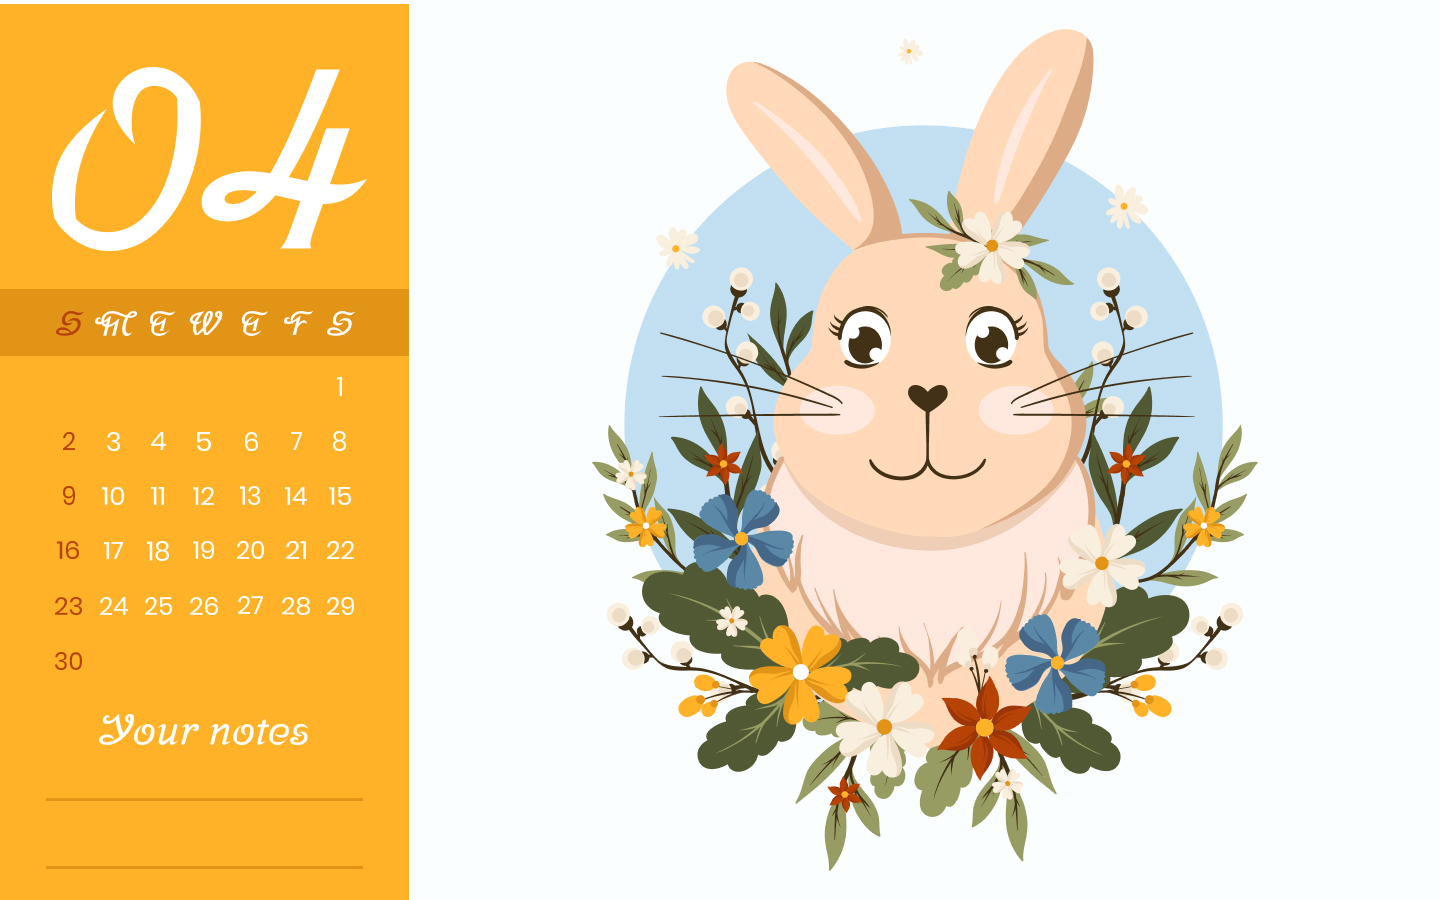 Calendar with a rabbit and flowers on it.